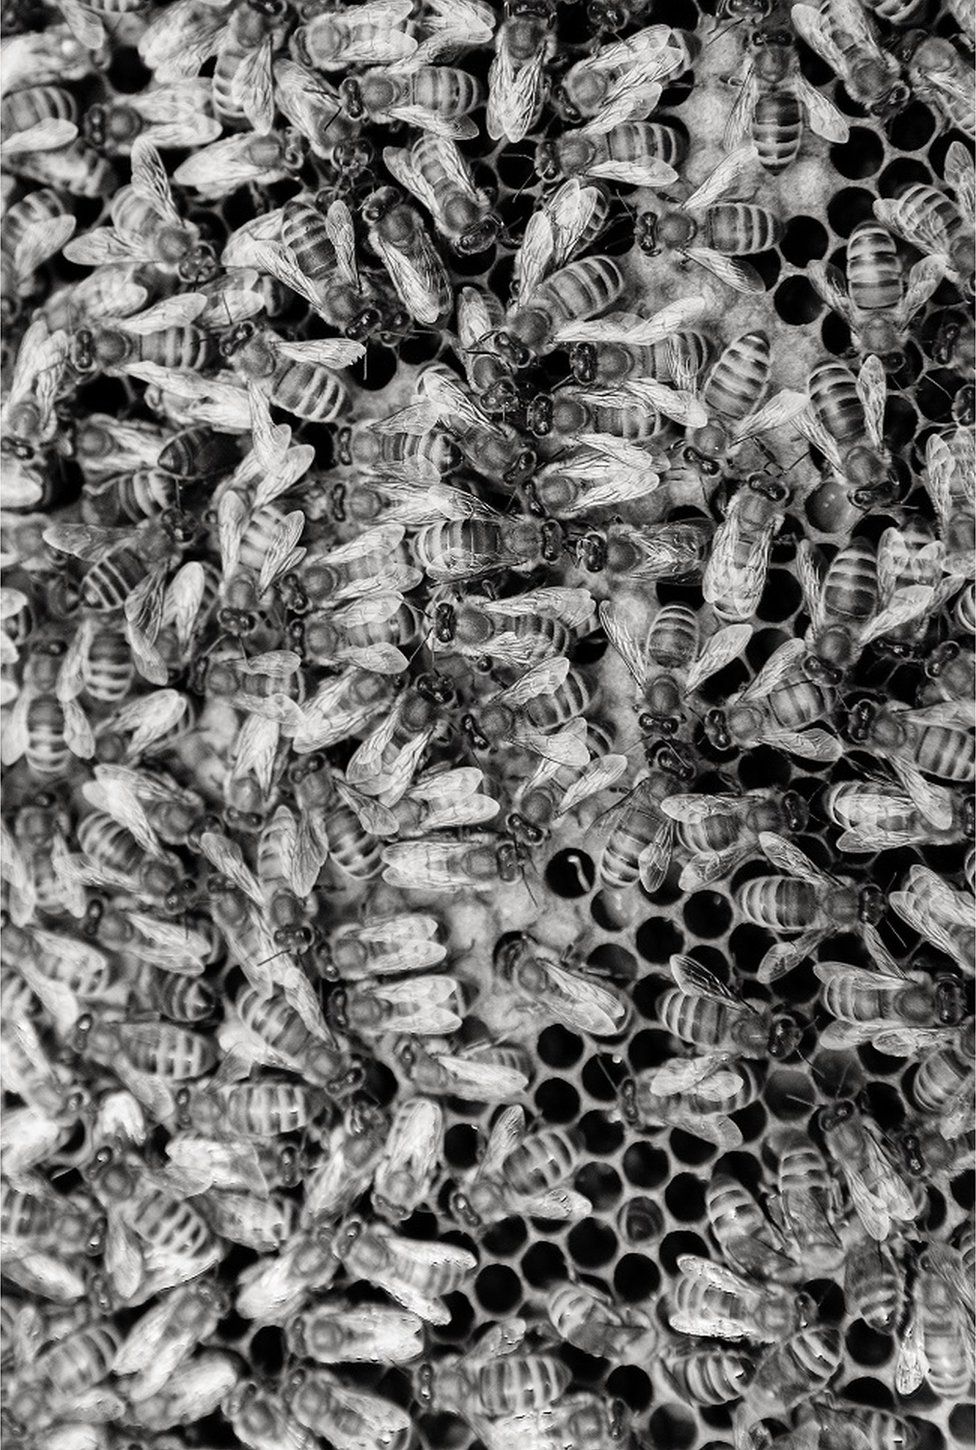 A close up photo of bees on honeycomb